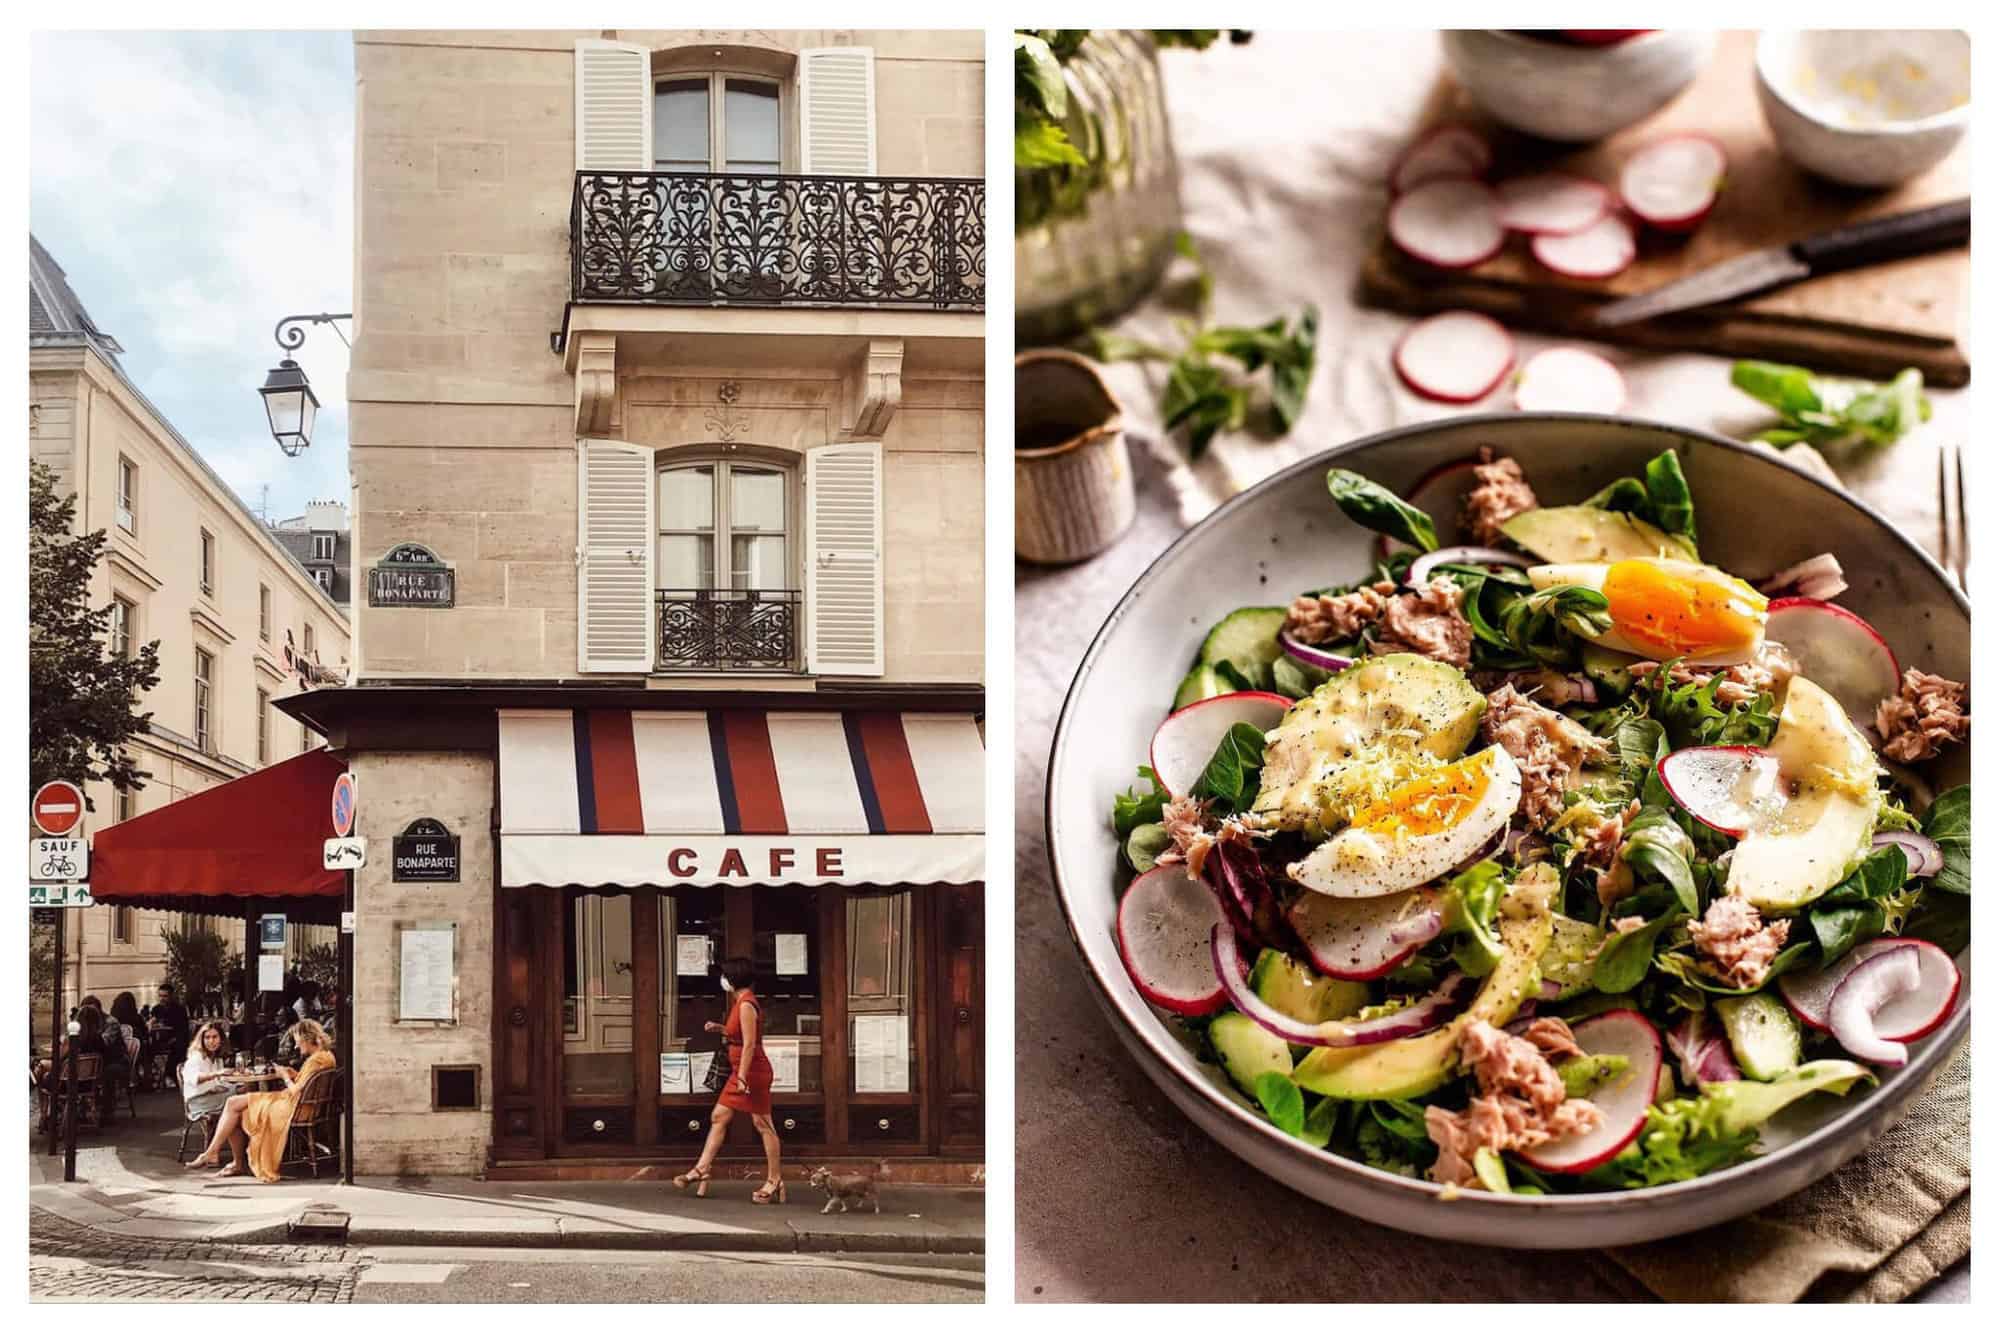 Left: The outside of a café in Paris. A woman is walking and around the corner there are two women sitting down and eating. Right: A nicoise salad.